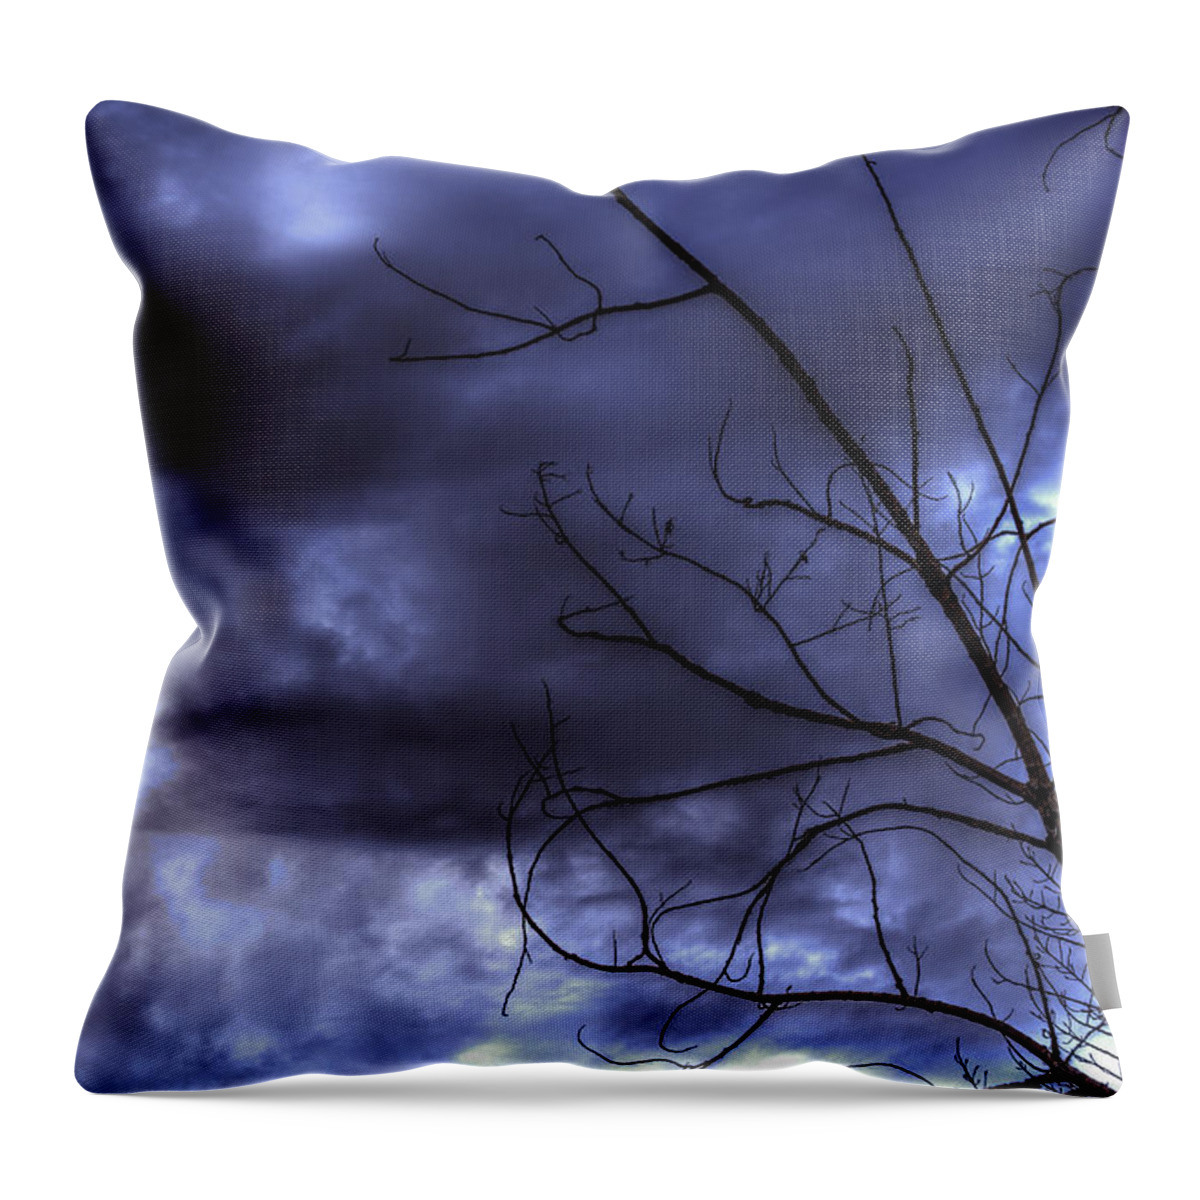 Clouds Throw Pillow featuring the photograph Winter Storm 2 by Ernest Moreno